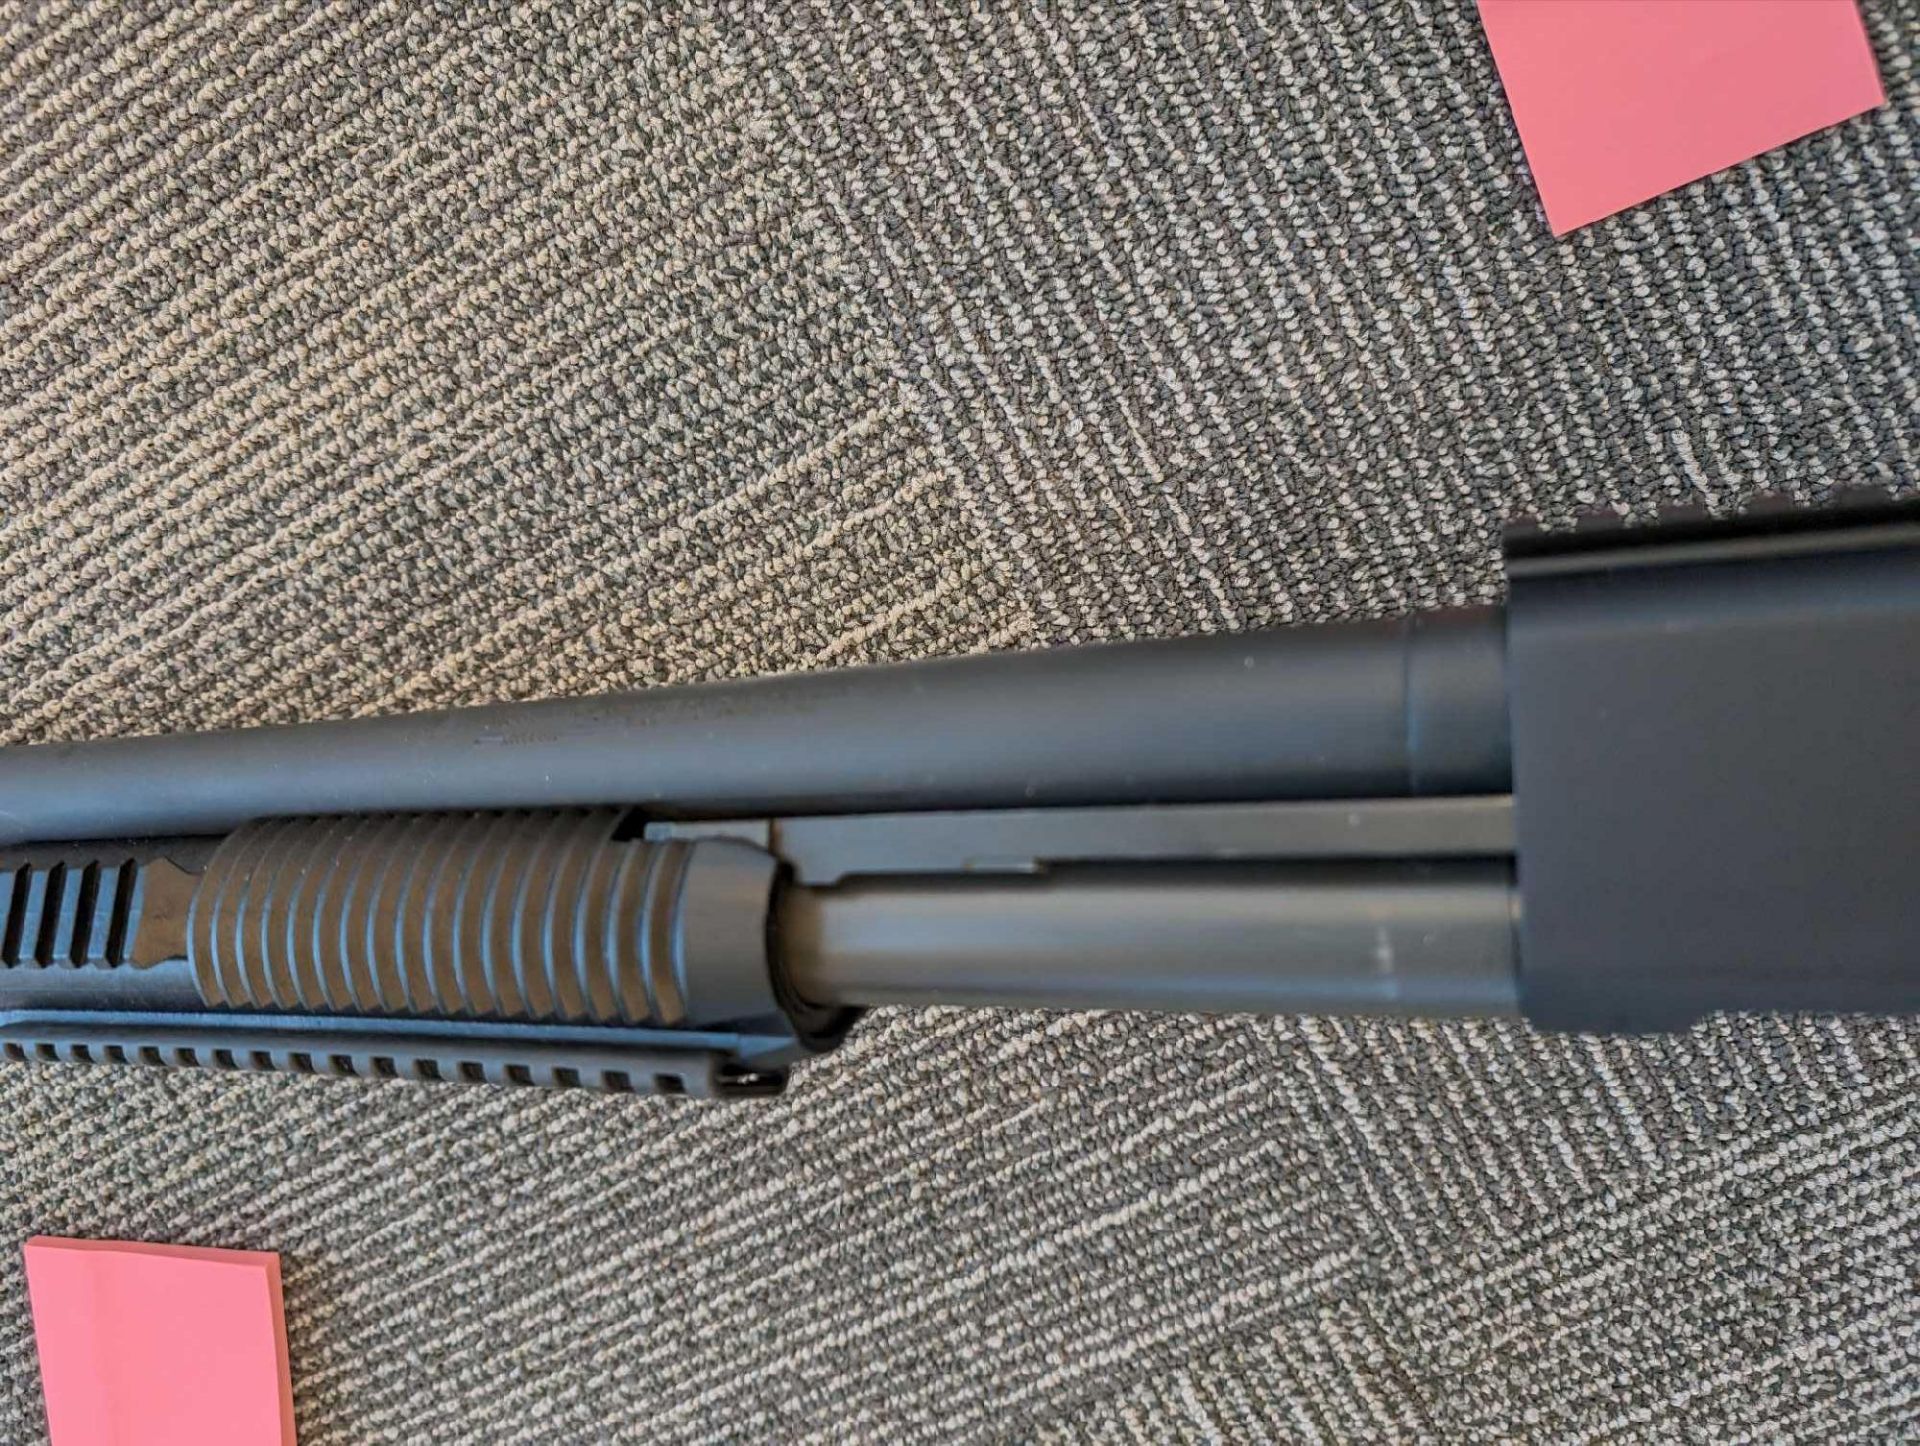 Mossberg model 590 12ga #V0975955   This will only be sold to residents of Utah - Image 7 of 9